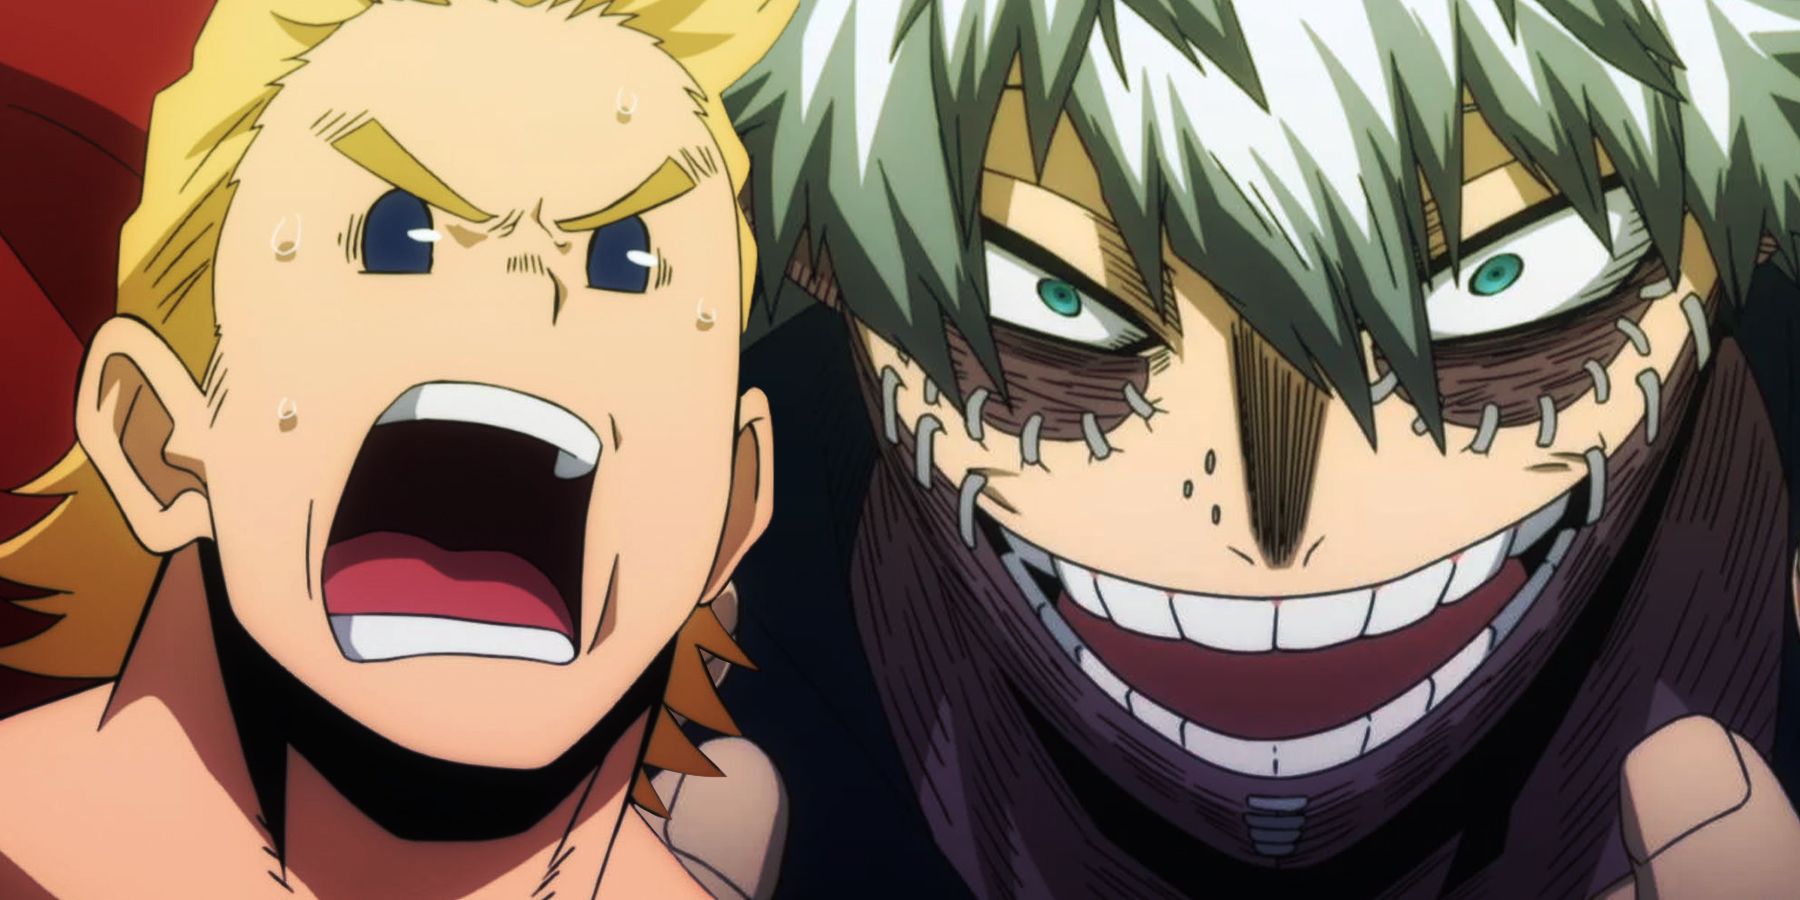 My Hero Academia Season 6 First Cour Review